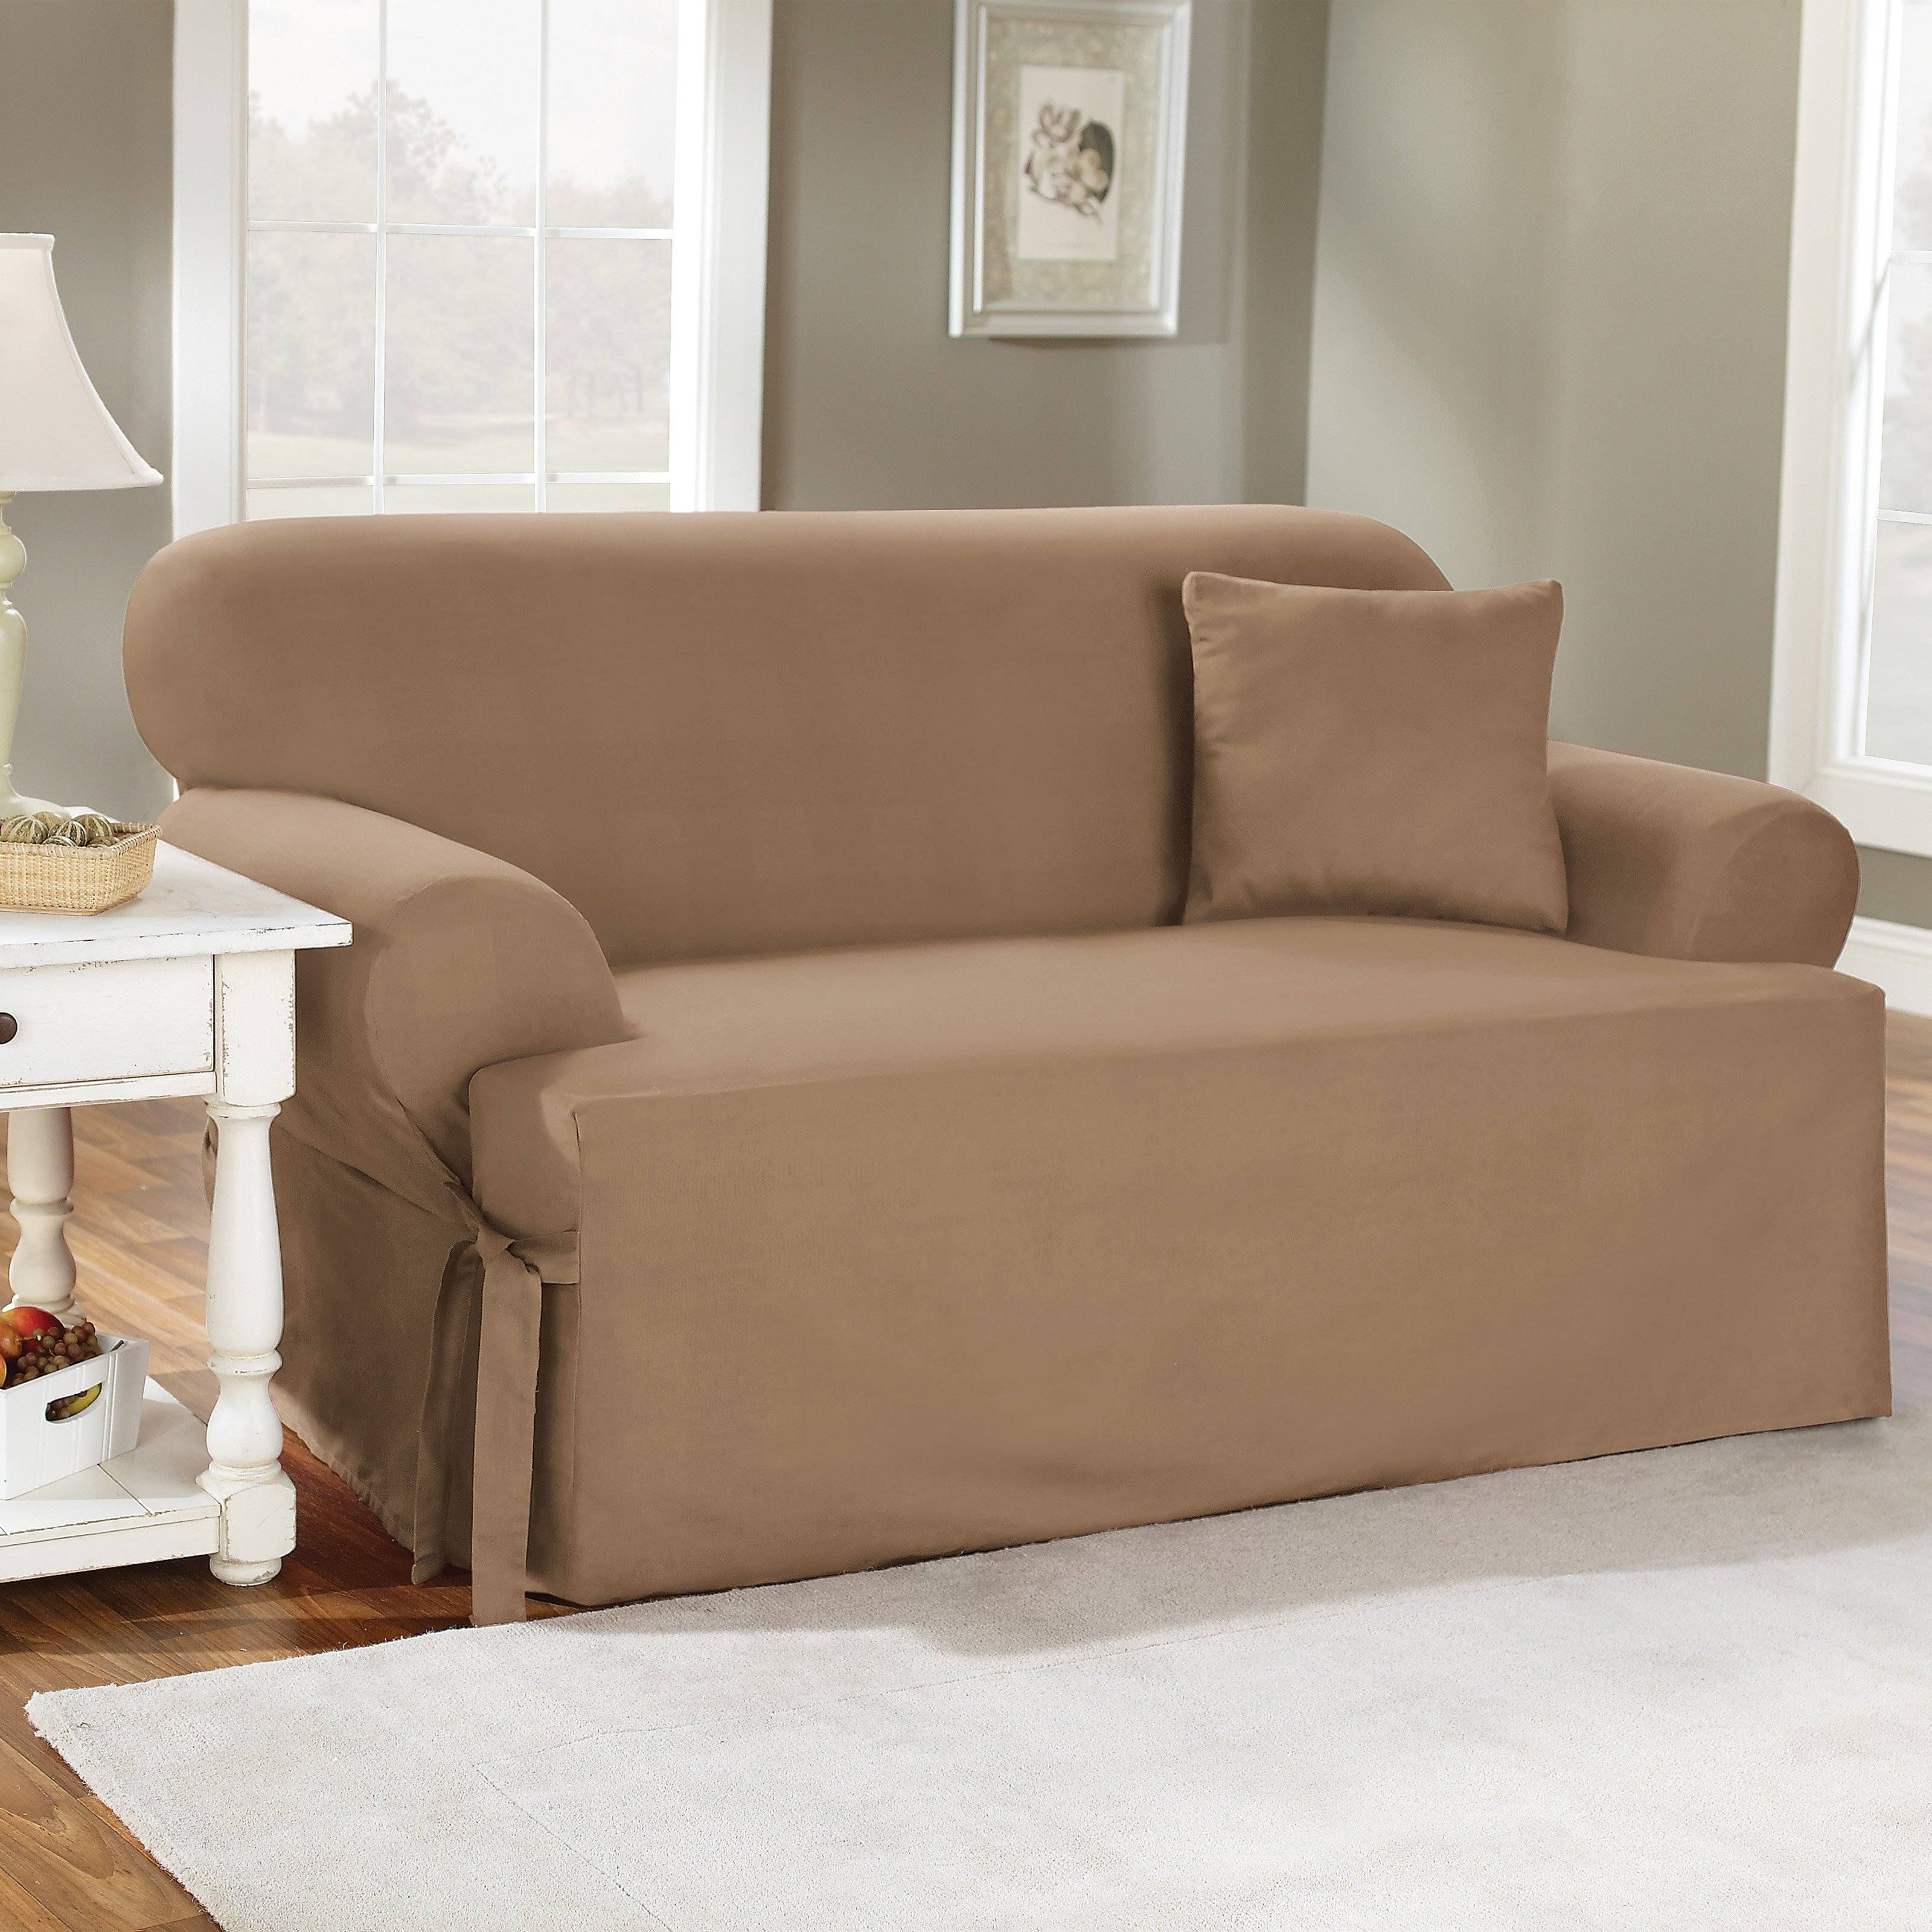 Furniture & Rug: Chic Recliner Covers For Prettier Recliner Ideas Inside Sofa Armchair Covers (View 20 of 30)